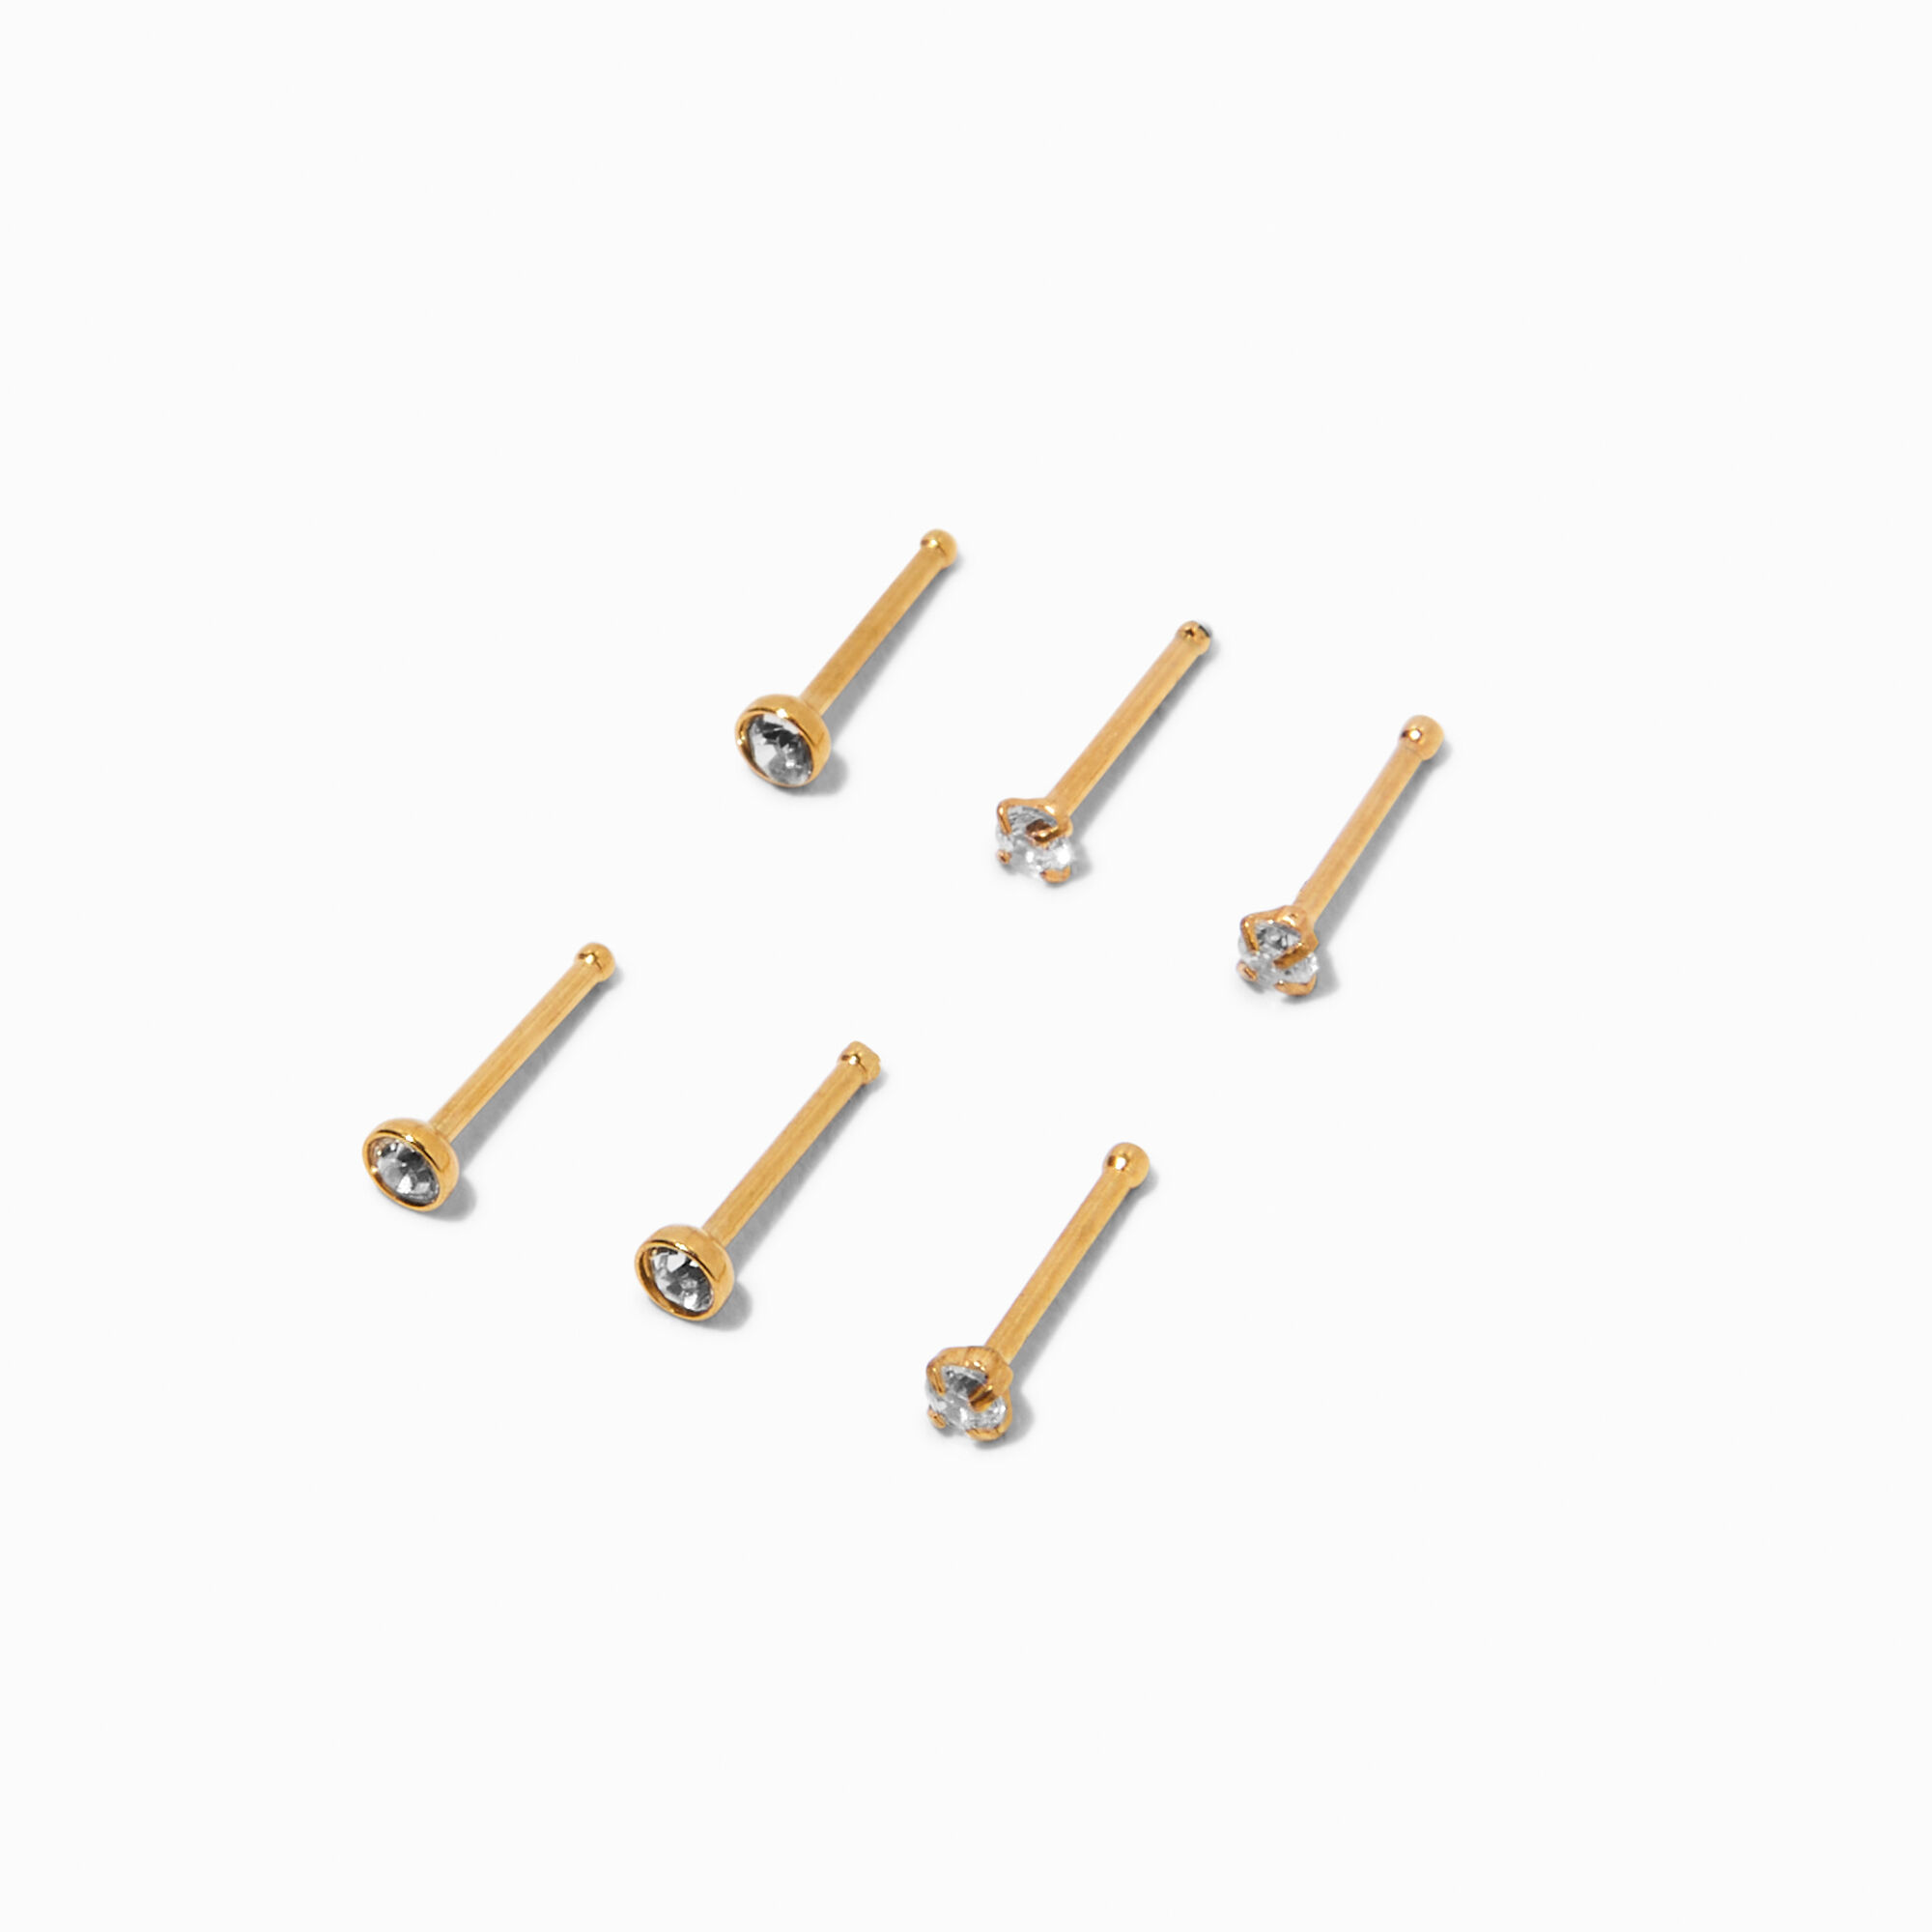 View Claires Tone Cubic Zirconia 20G Stainless Steel Nose Studs 6 Pack Gold information